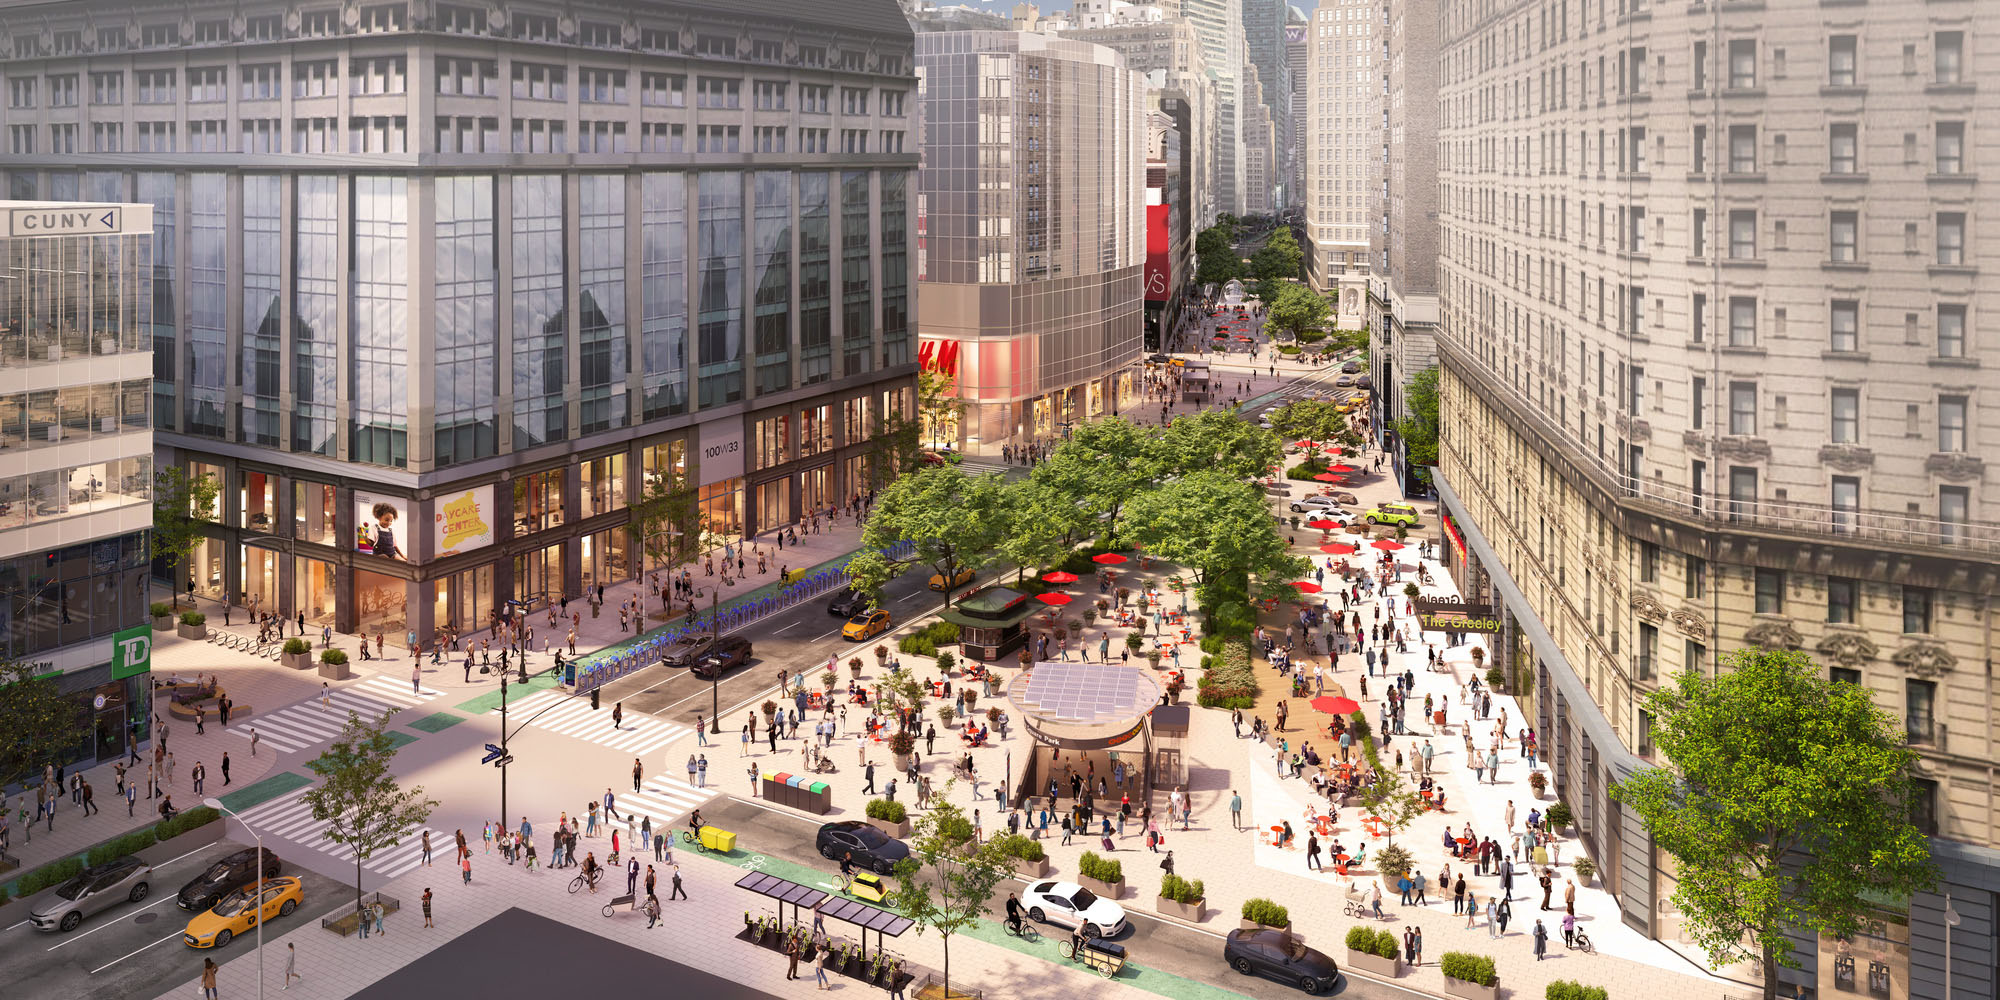 Rendering of Greeley Square after capital construction work is completed. Credit: “New” New York Panel